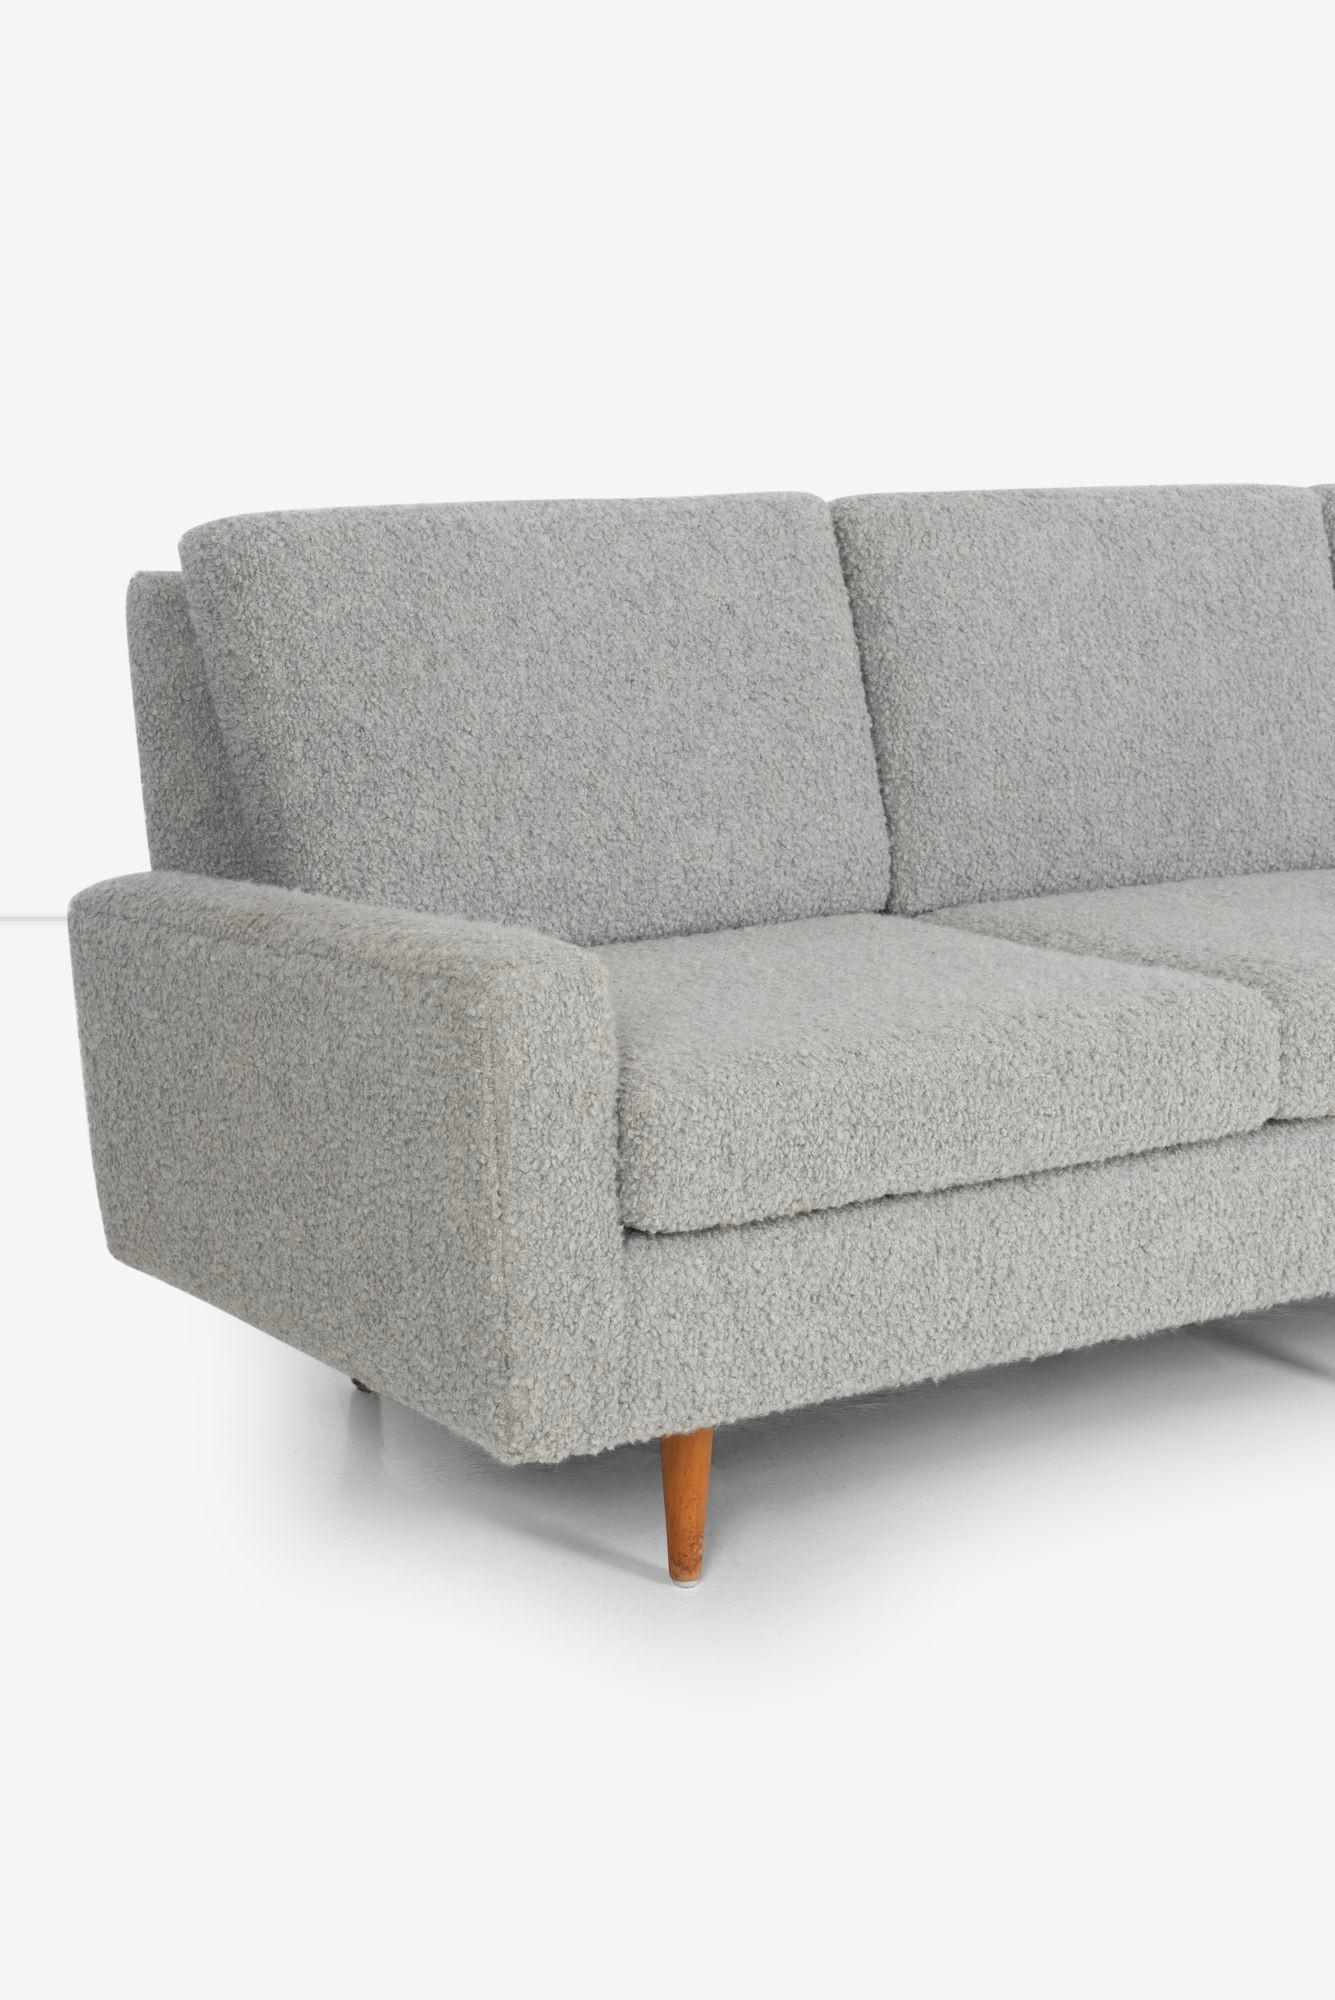 Florence Knoll Three-Seat Sofa For Sale 1